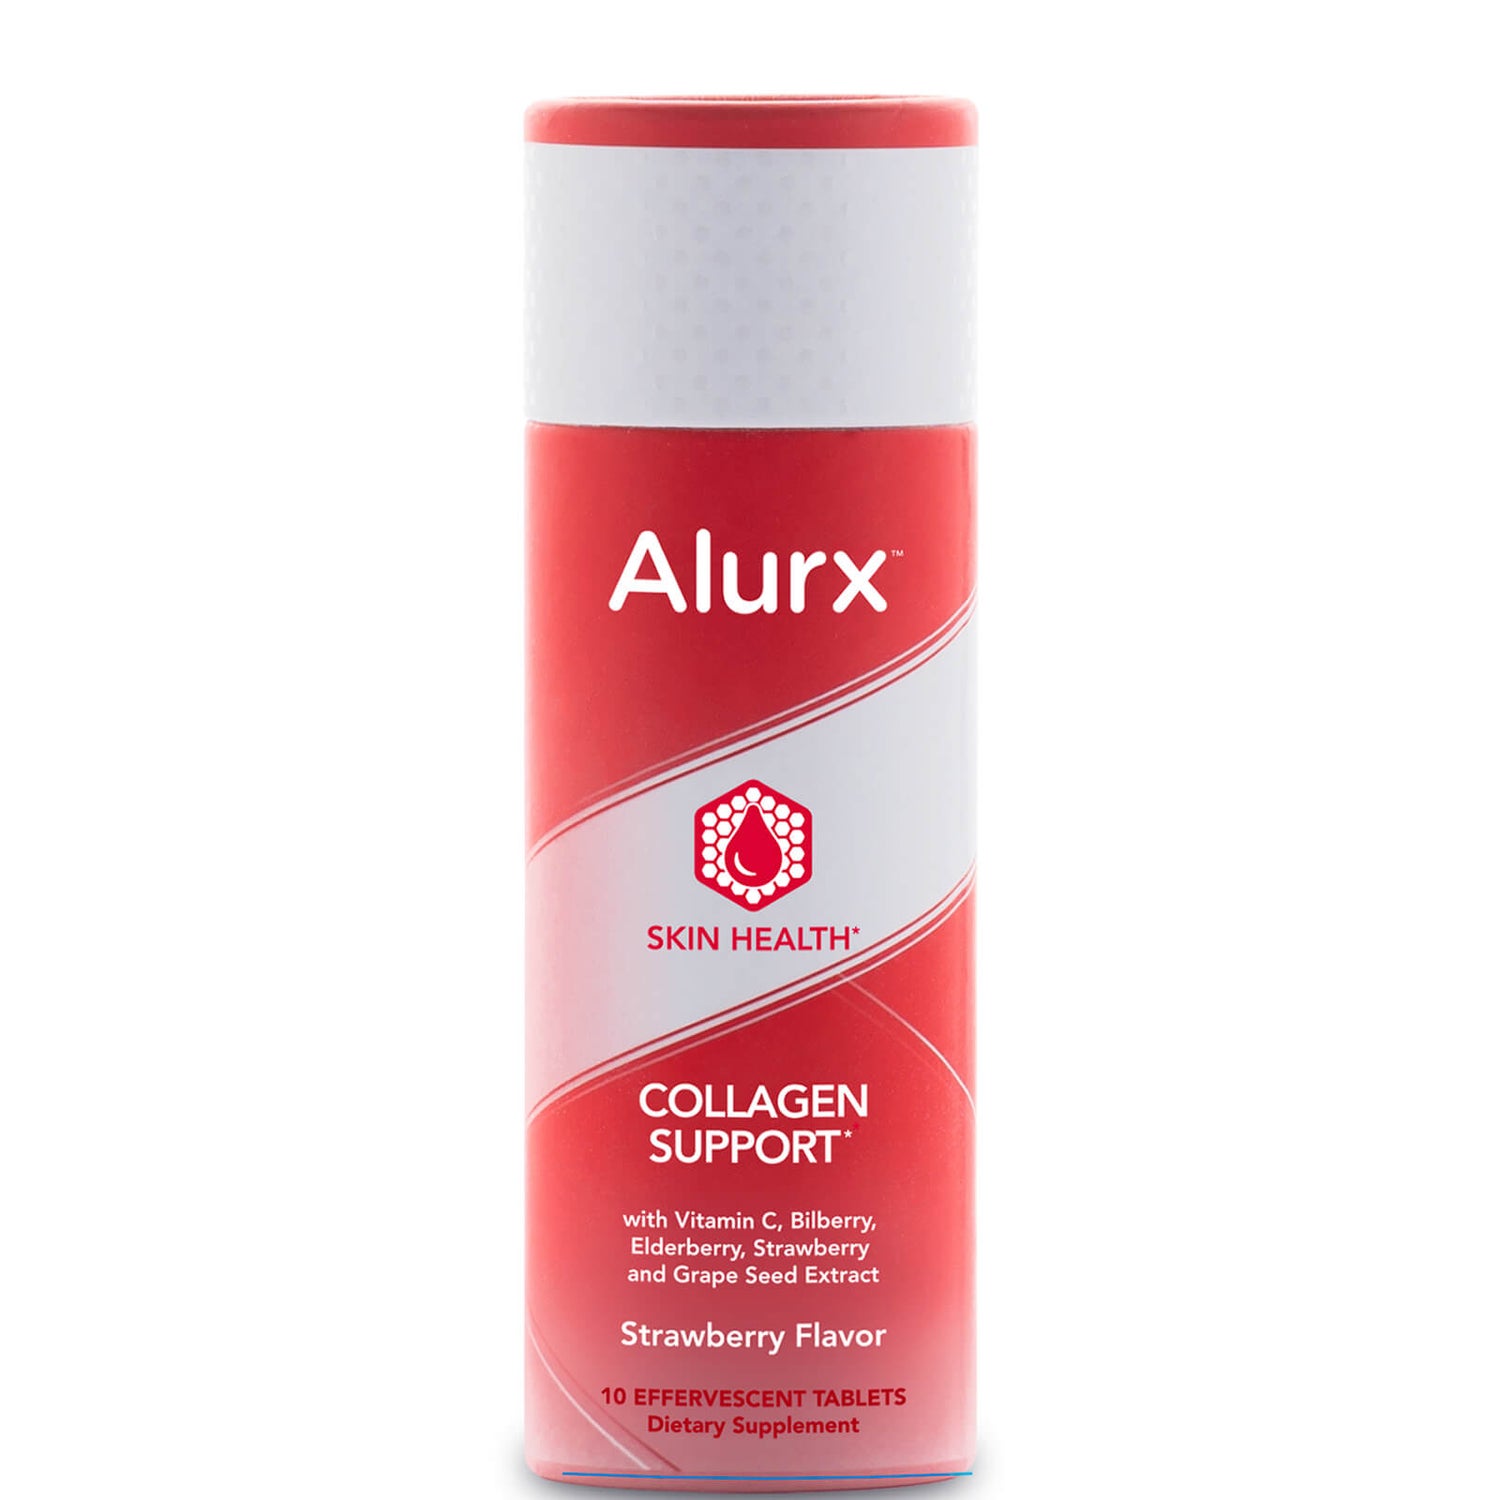 Alurx Collagen Support Effervescent Tablets - Strawberry (10 Count)